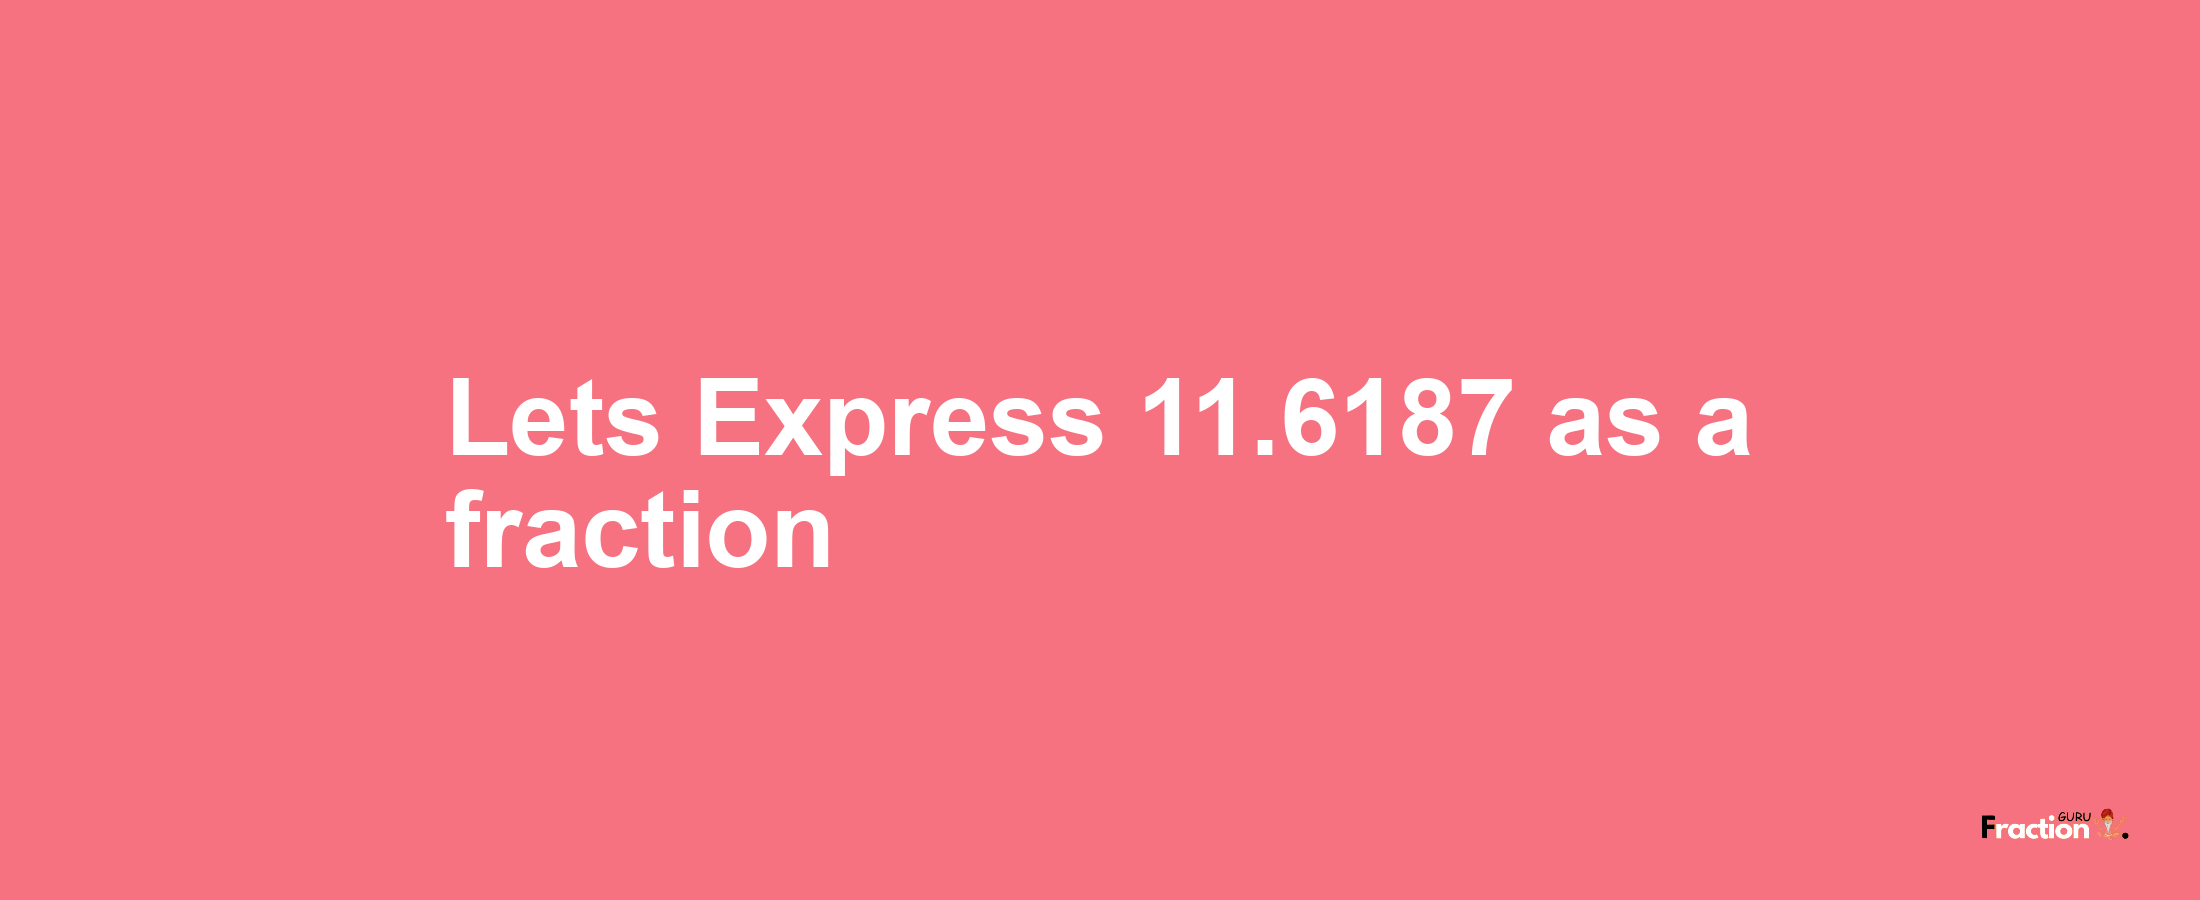 Lets Express 11.6187 as afraction